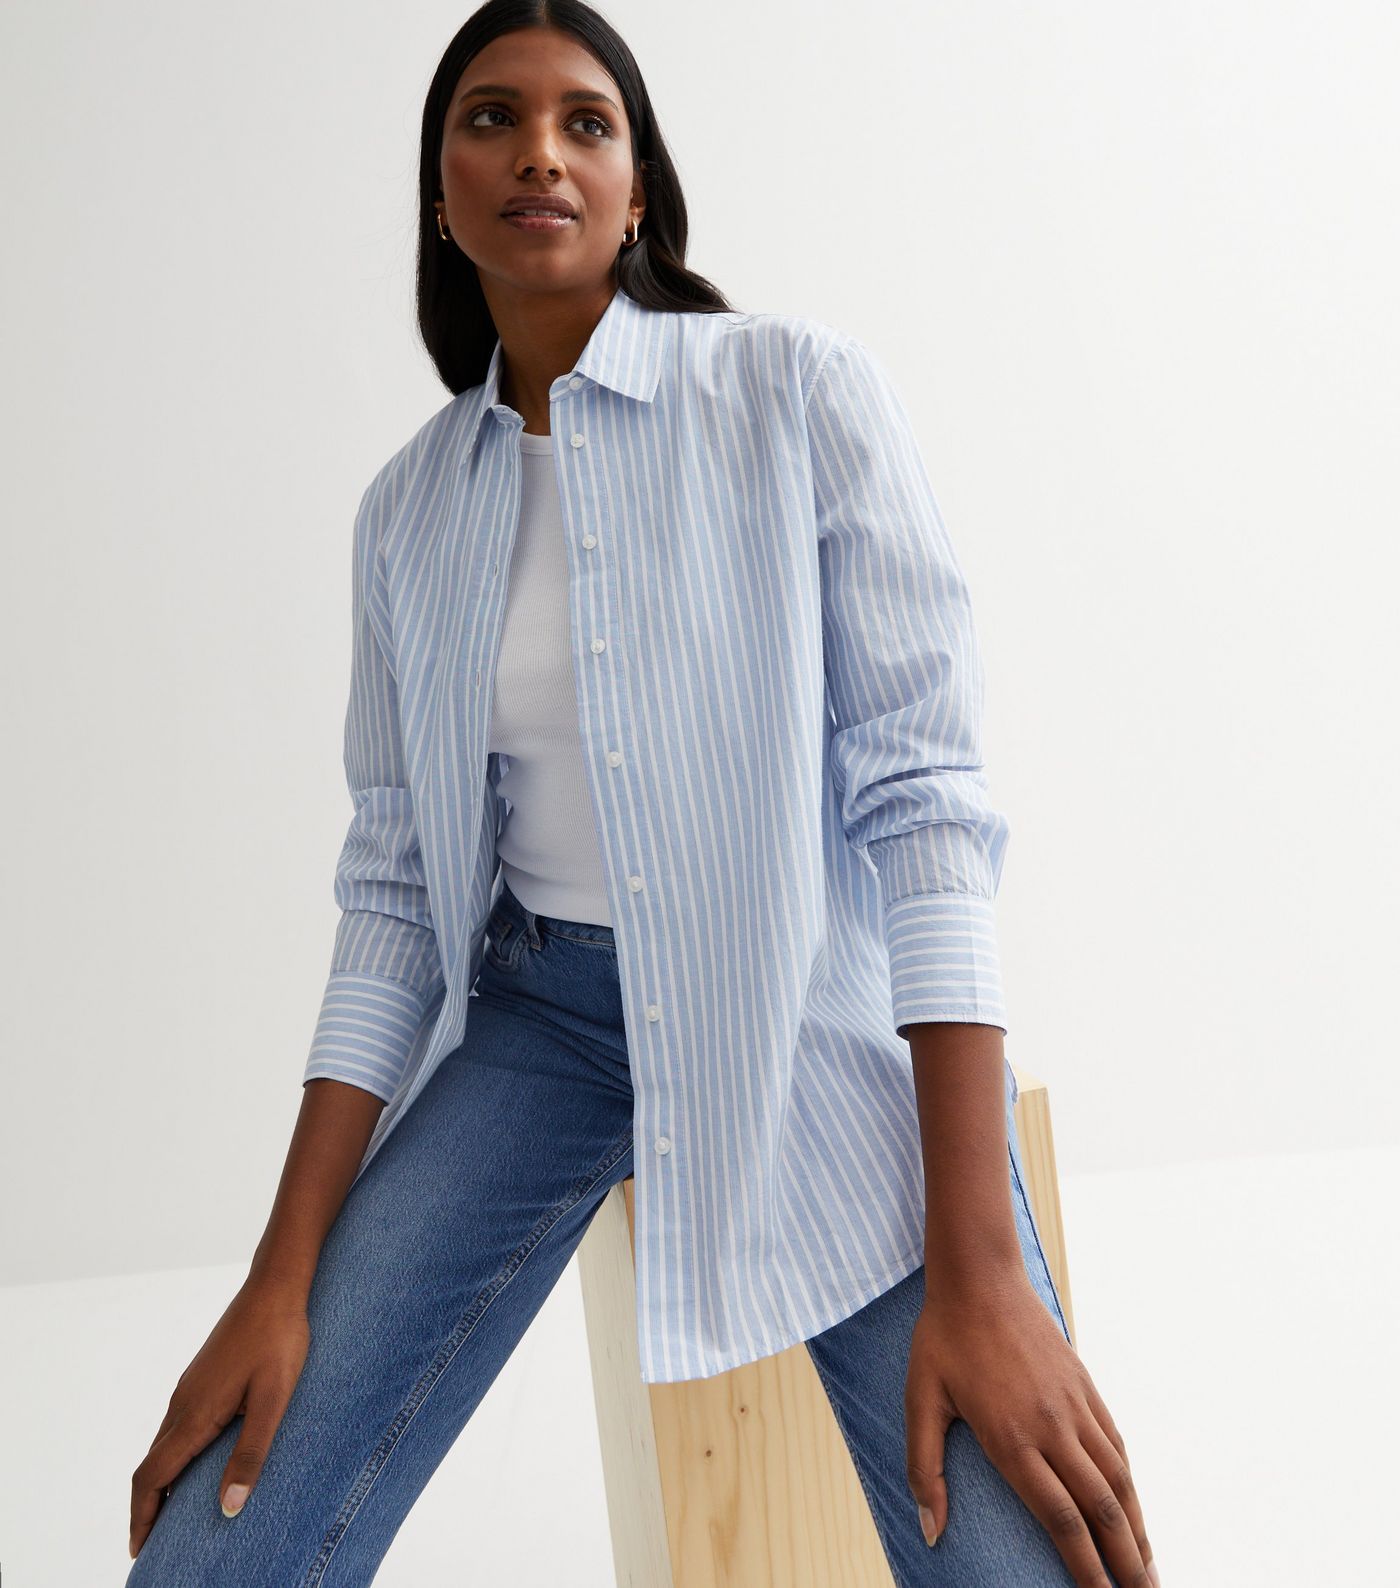 Blue Stripe Cotton Poplin Shirt
						
						Add to Saved Items
						Remove from Saved Items | New Look (UK)